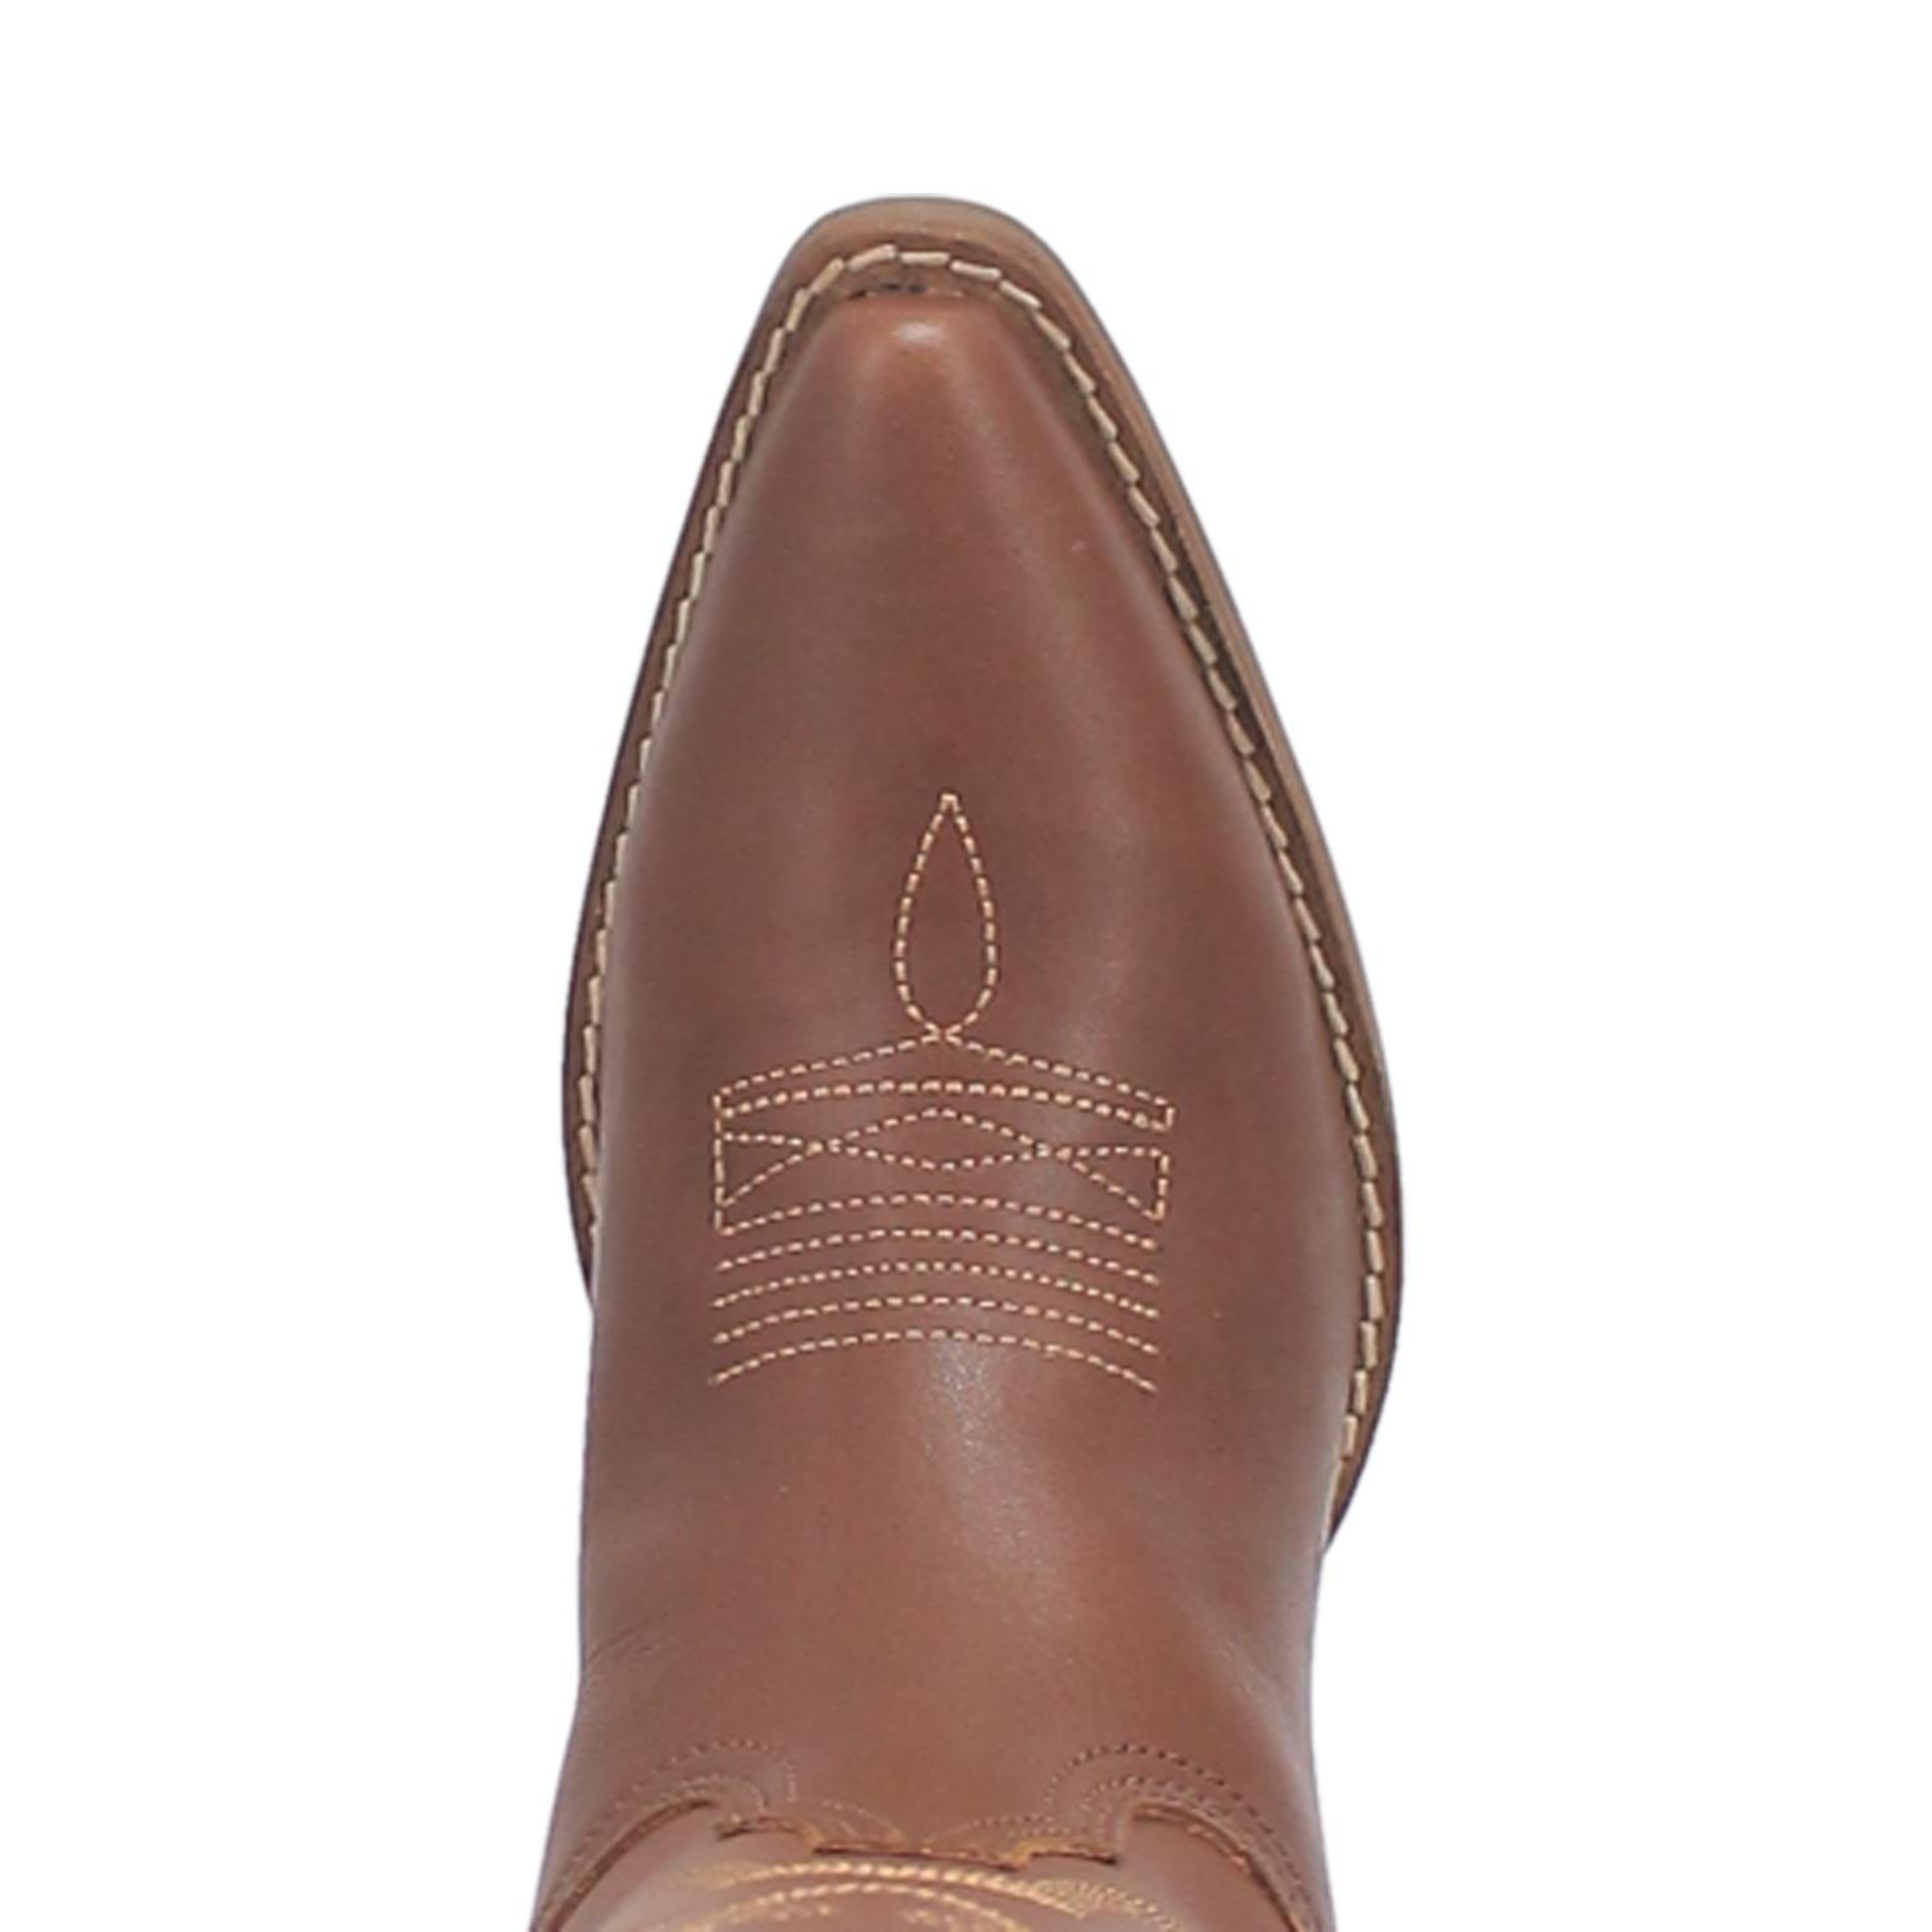 Online Exclusive | Dingo | Out West Leather Cowboy Boots in Brown Smooth **PREORDER